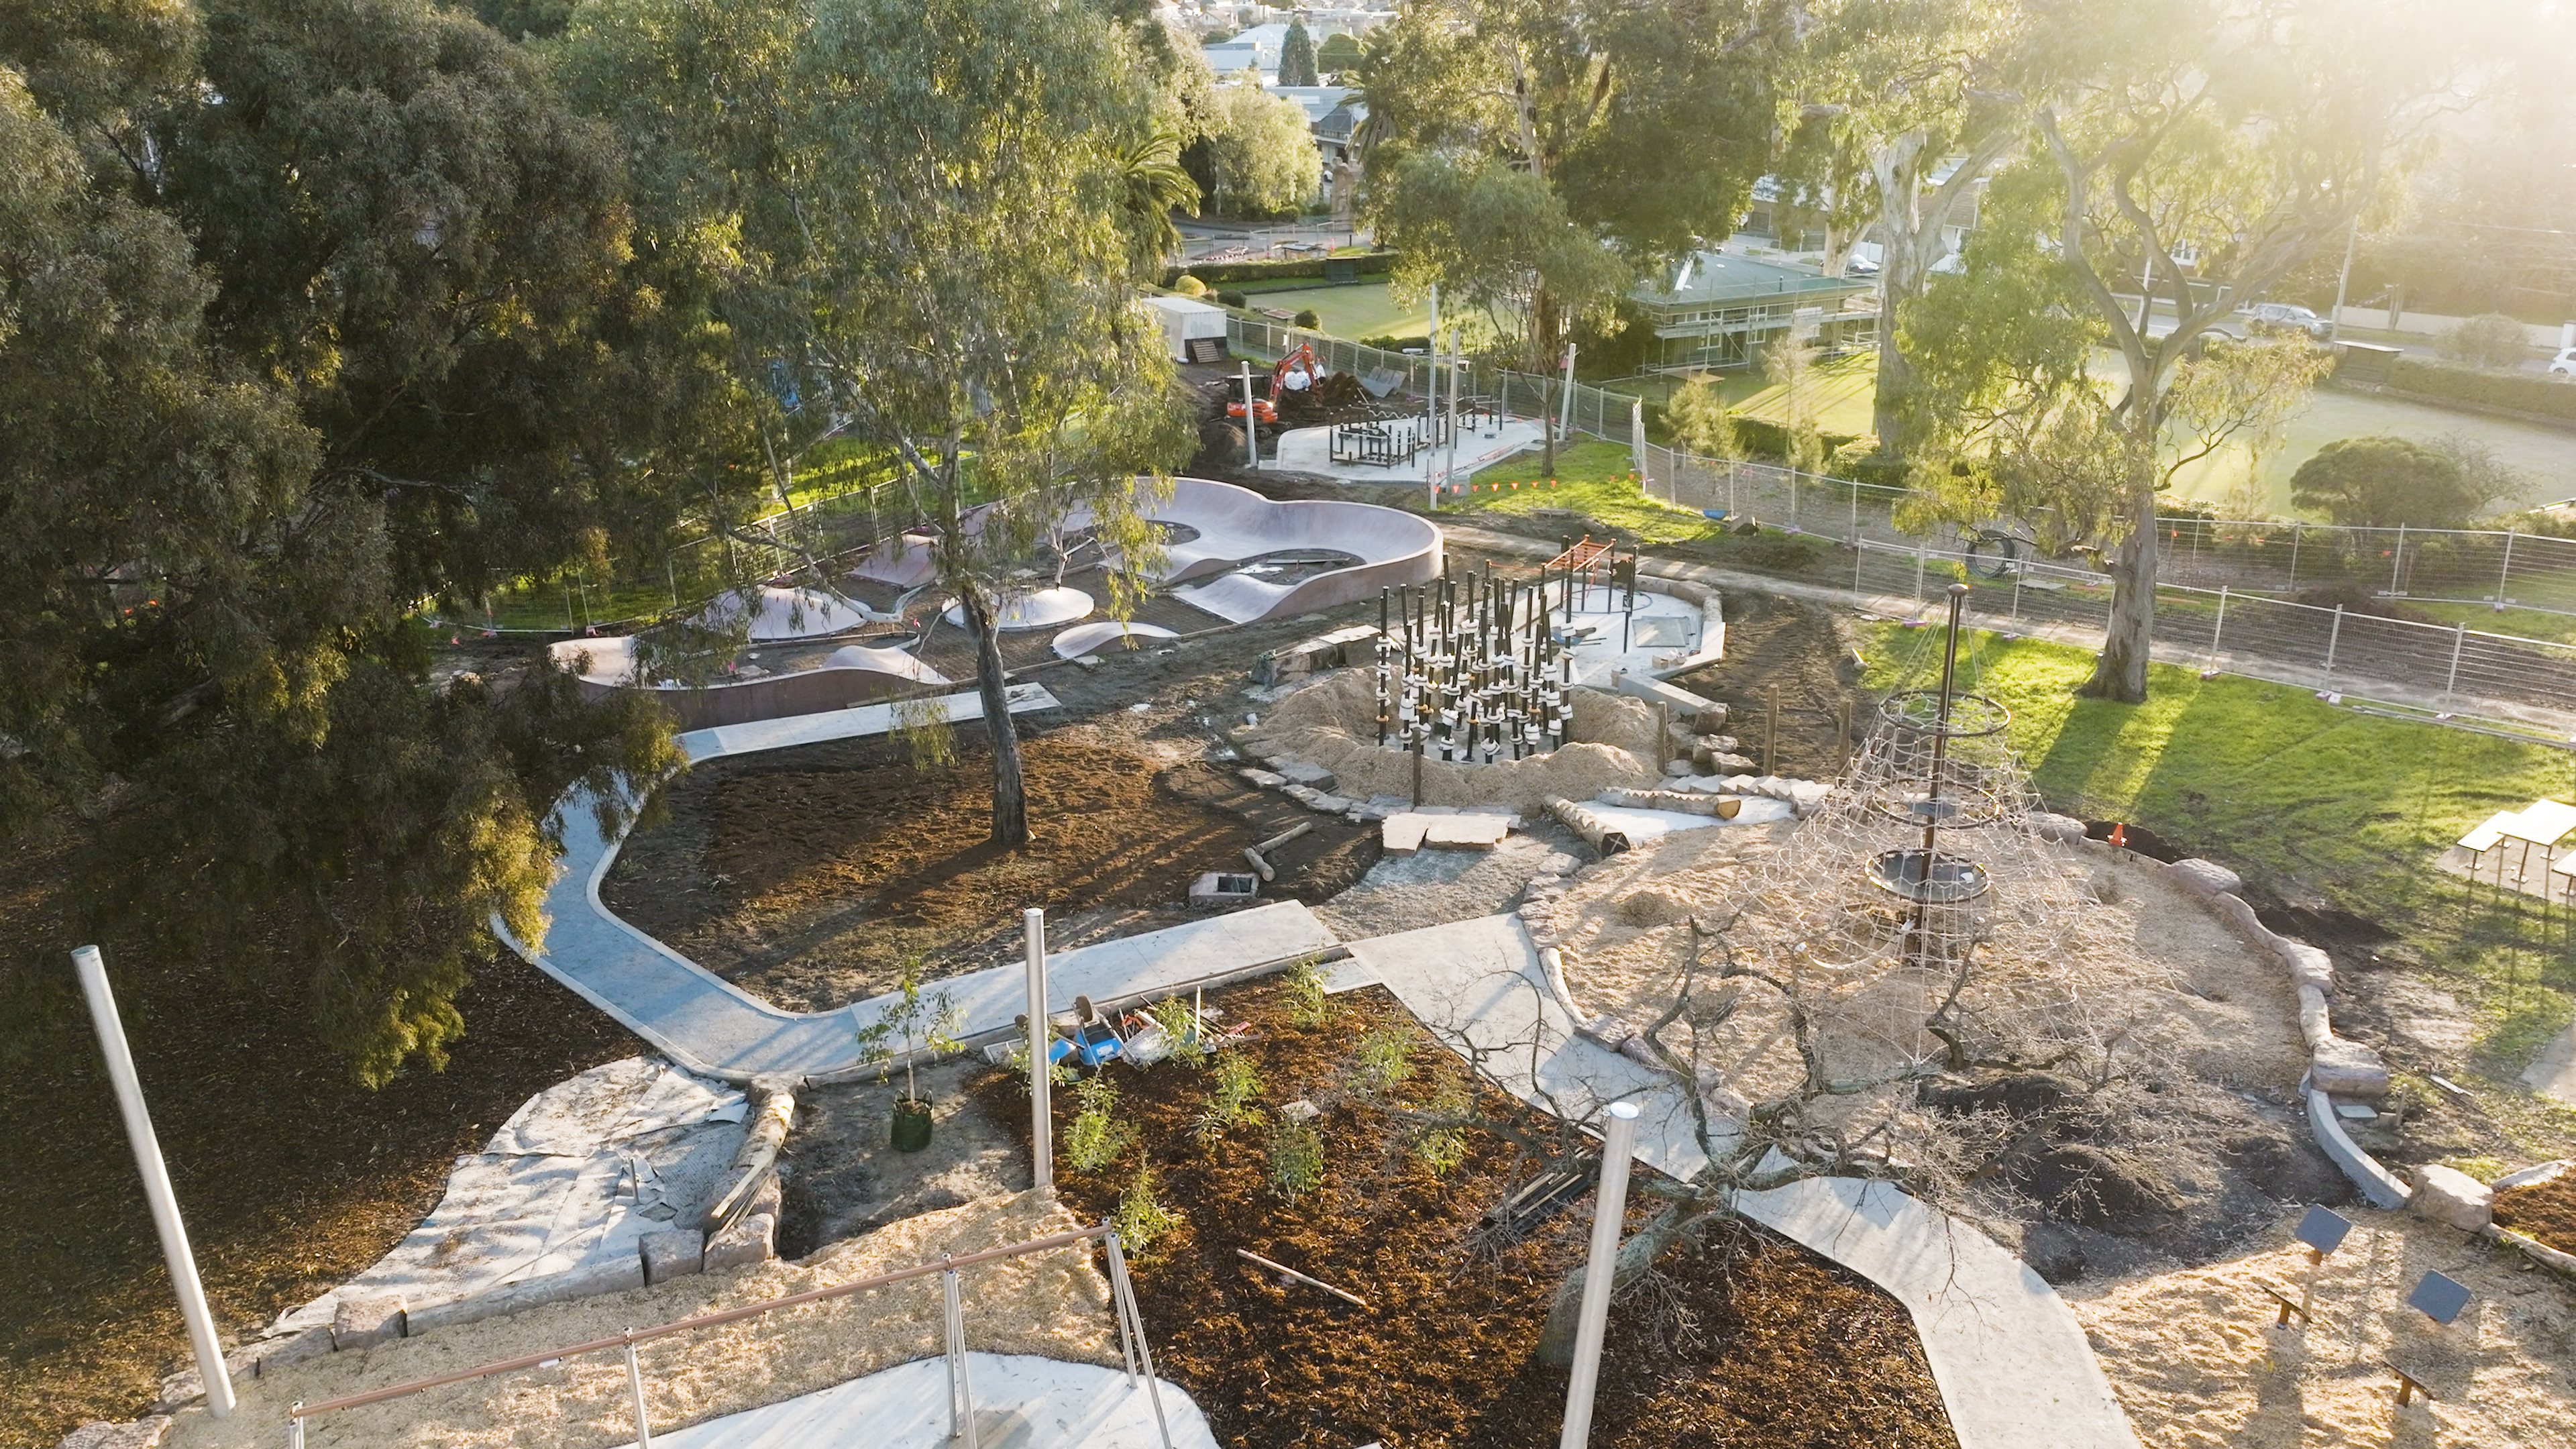 Looking down on the Victoria park regional playground area that has been newly renovated with new equipment and landscaping